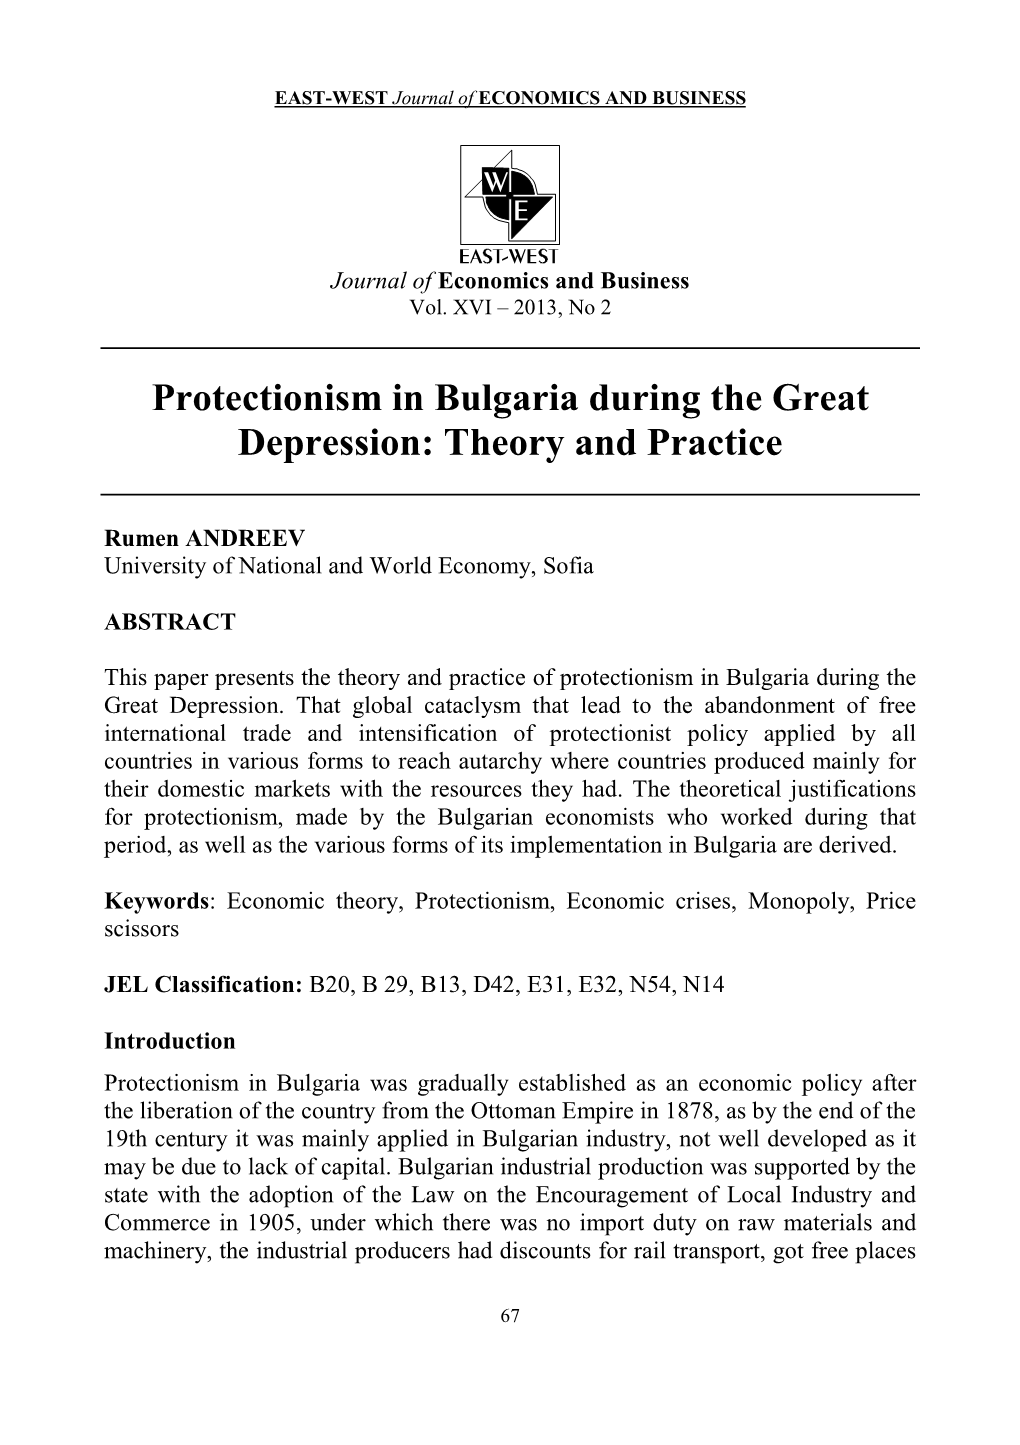 Protectionism in Bulgaria During the Great Depression: Theory and Practice